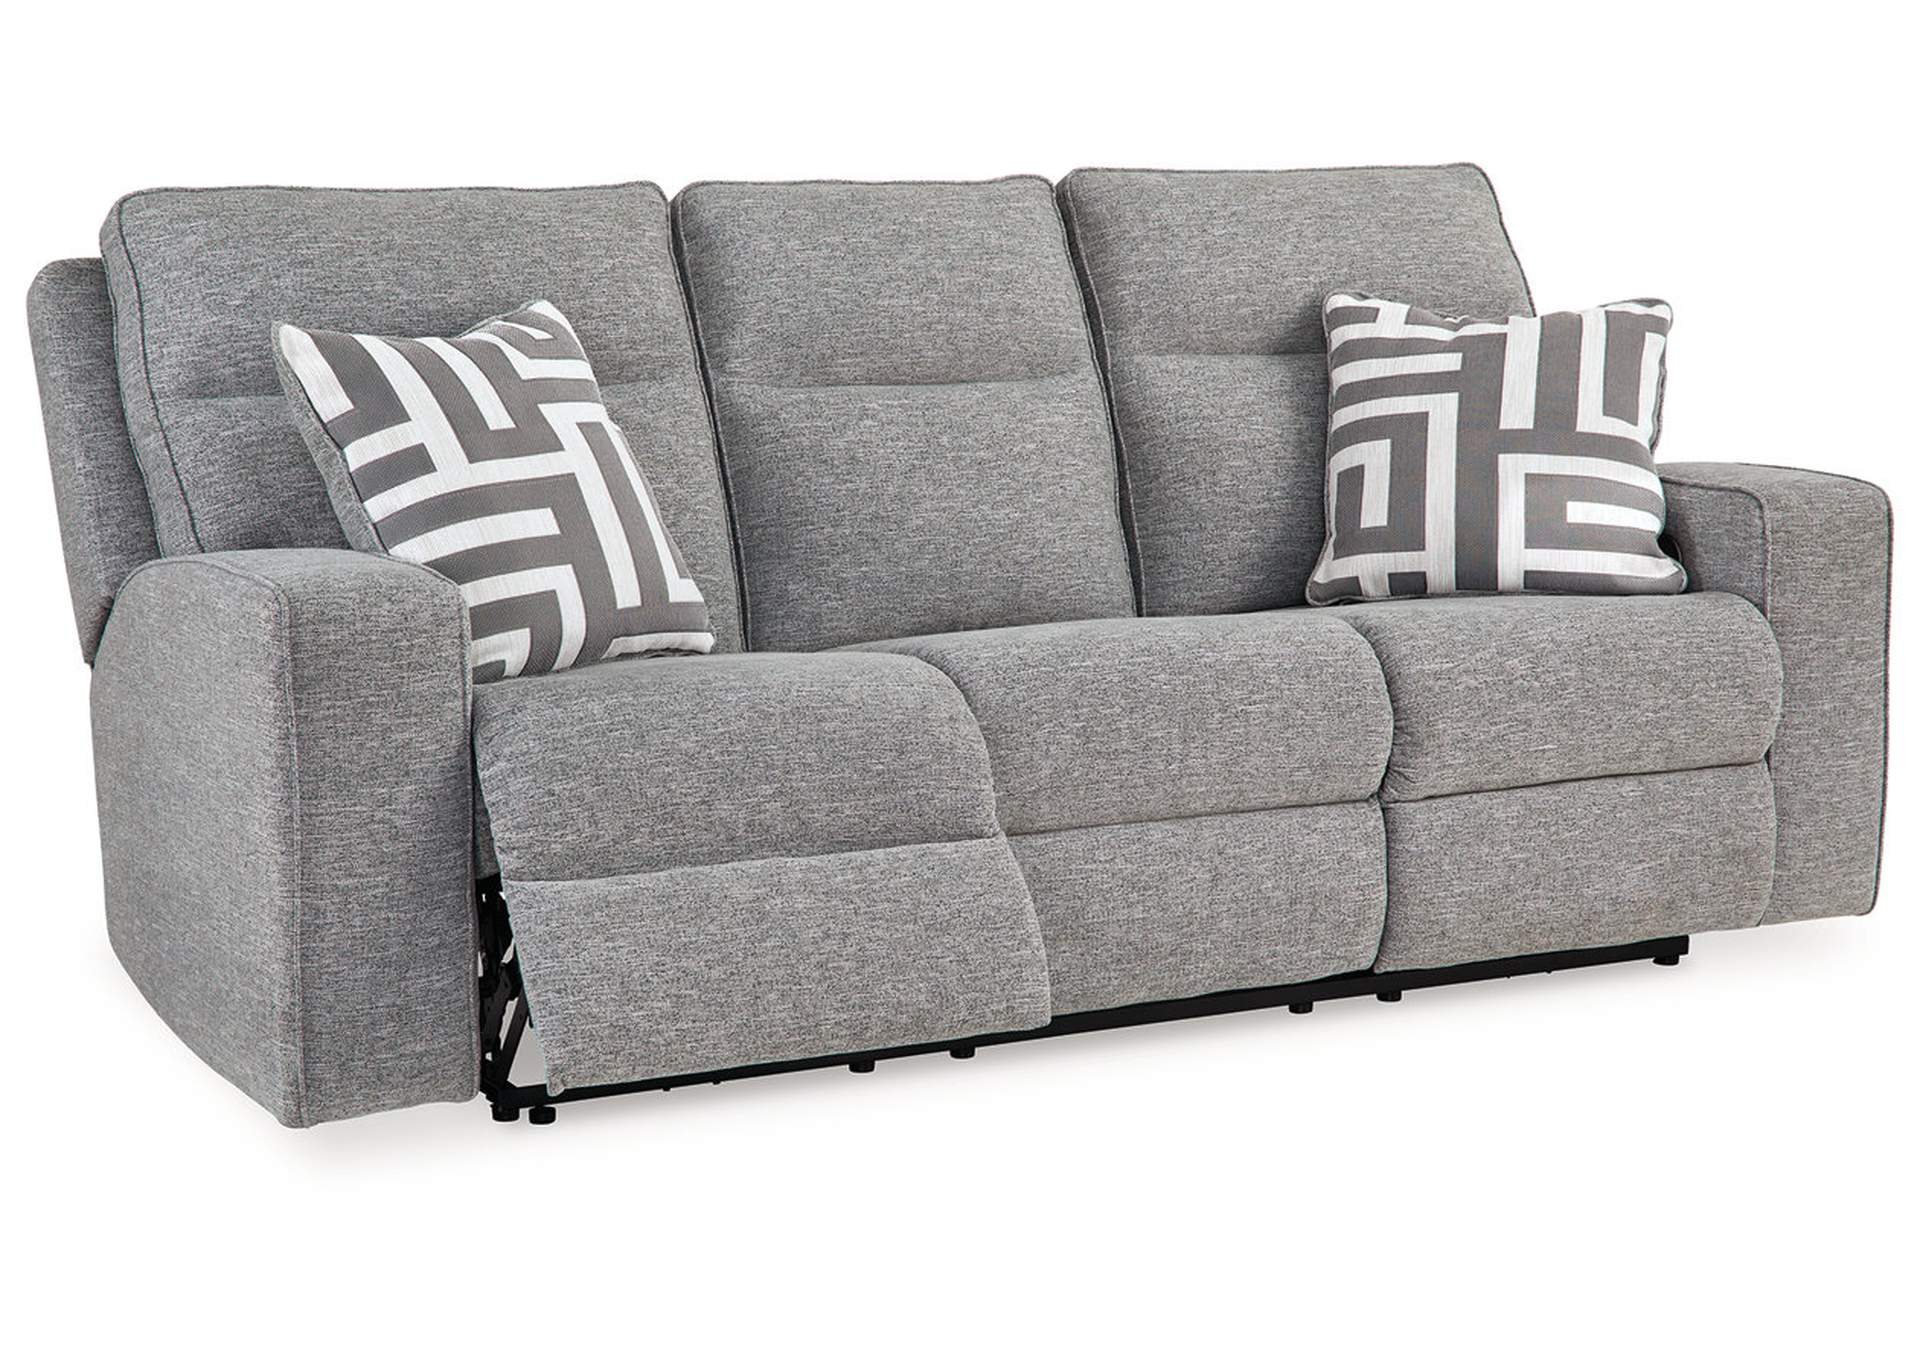 Biscoe Sofa, Loveseat and Recliner,Signature Design By Ashley